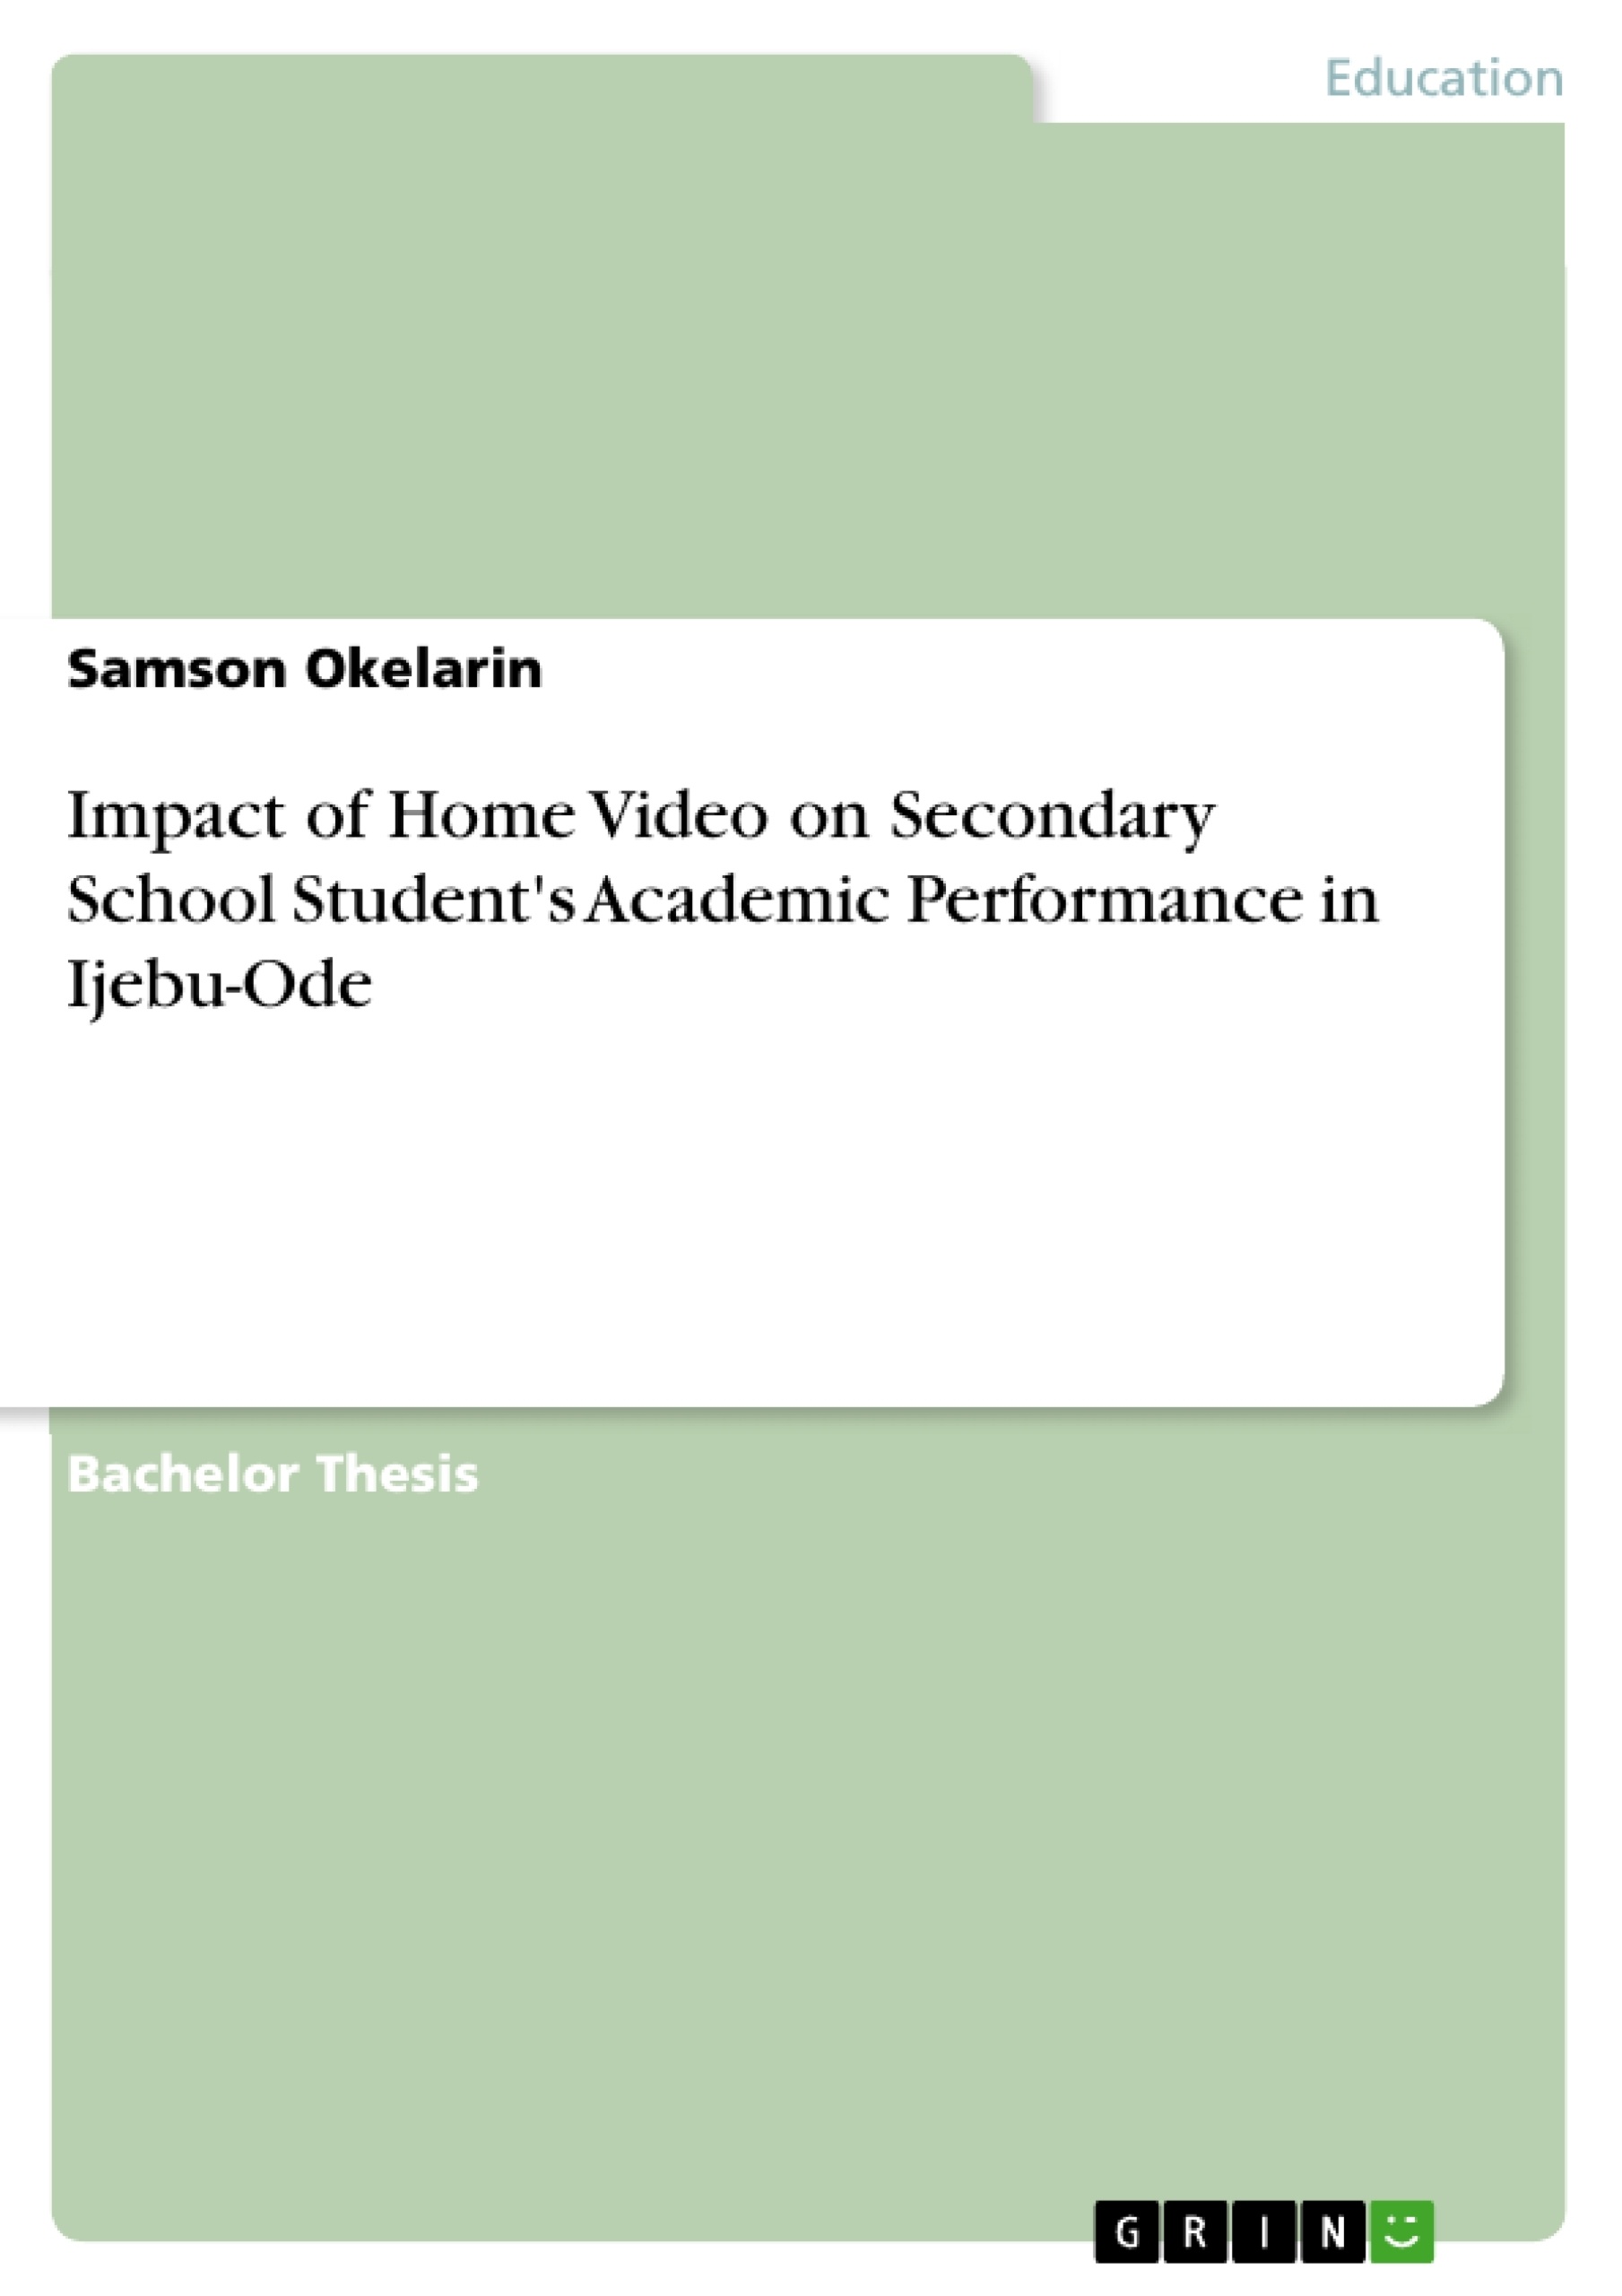 Title: Impact of Home Video on Secondary School Student's Academic Performance in Ijebu-Ode